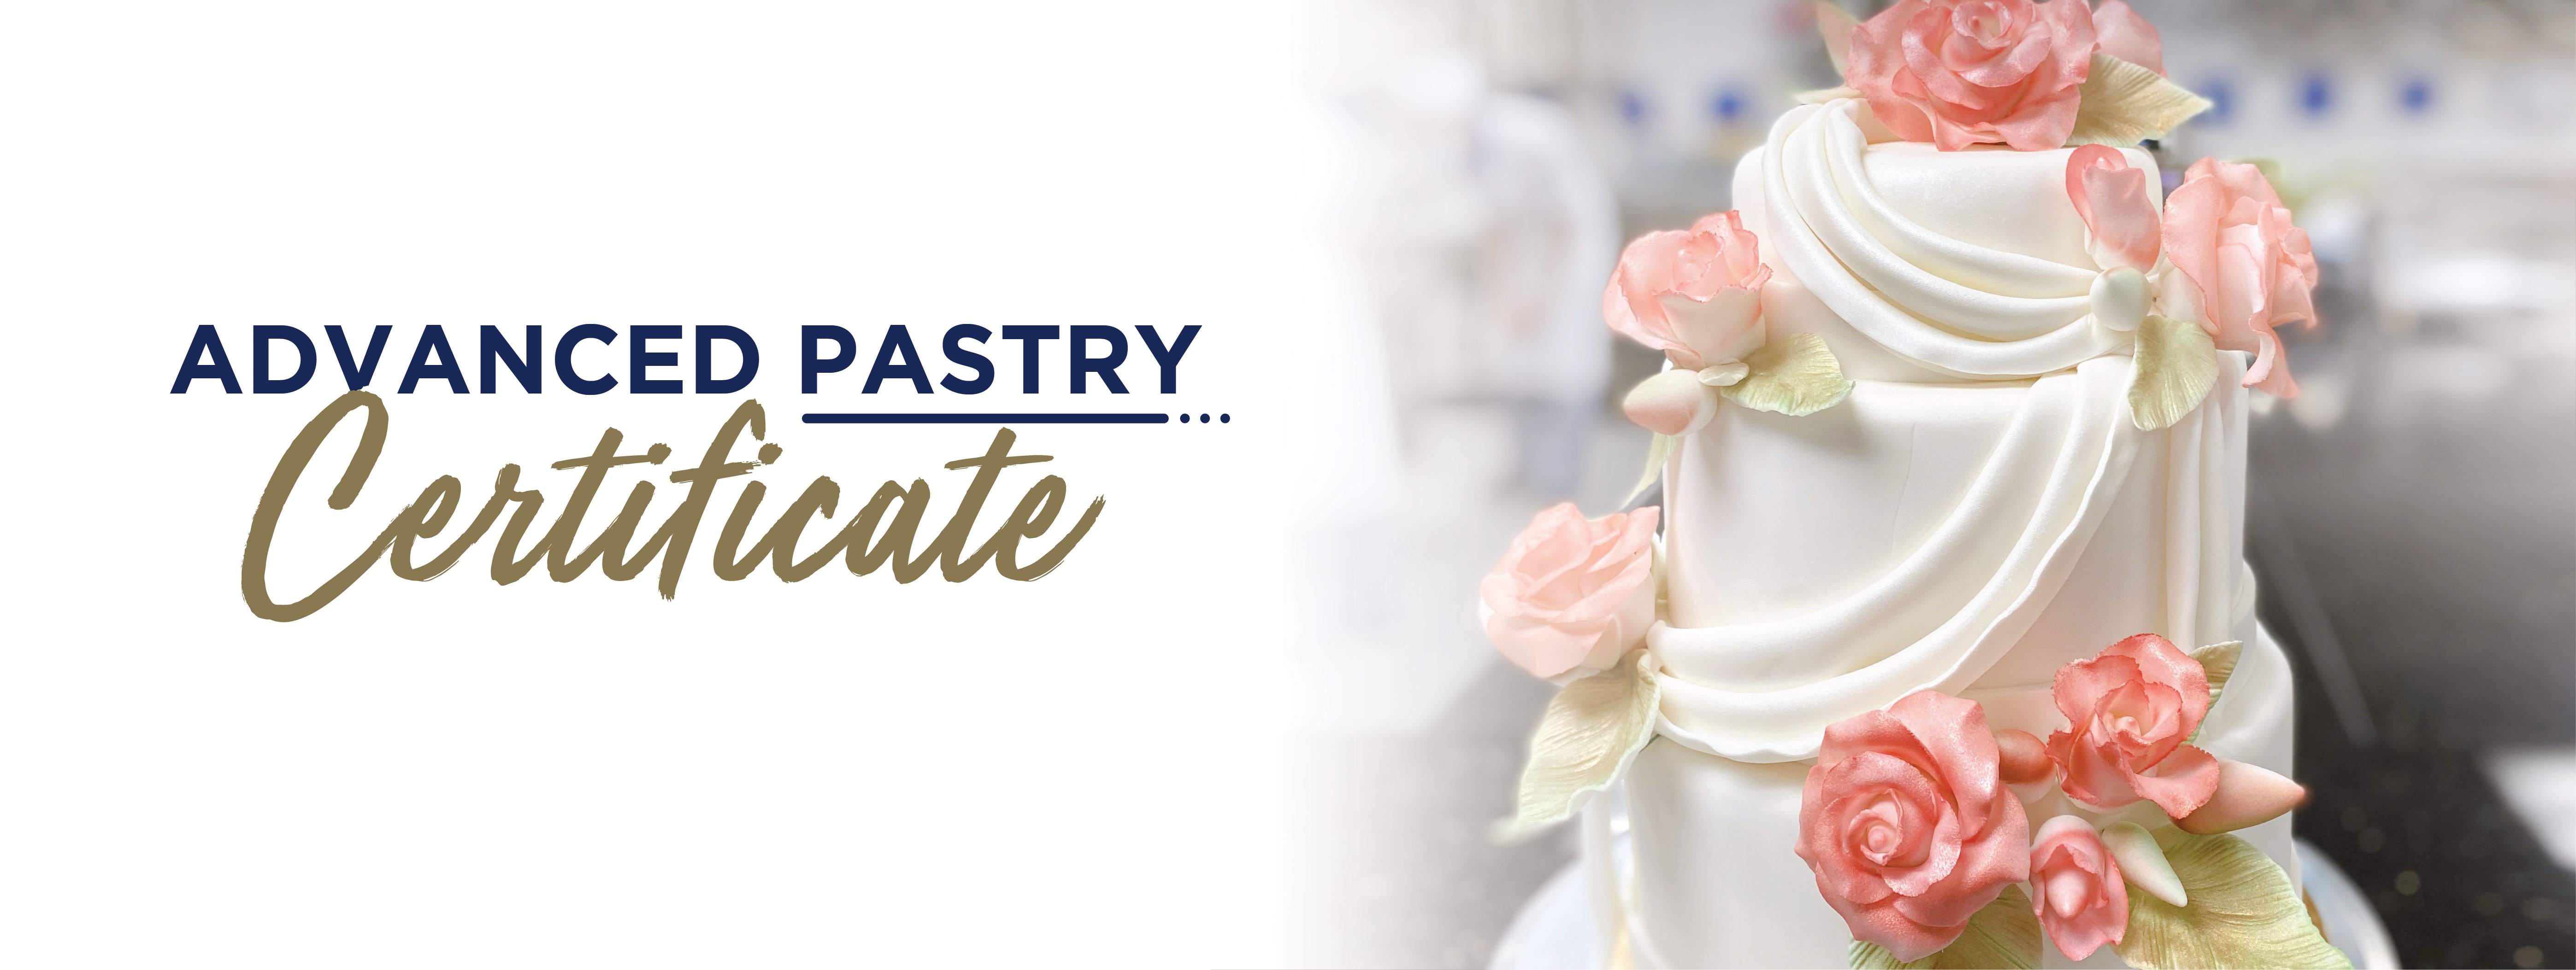 advanced pastry certificate